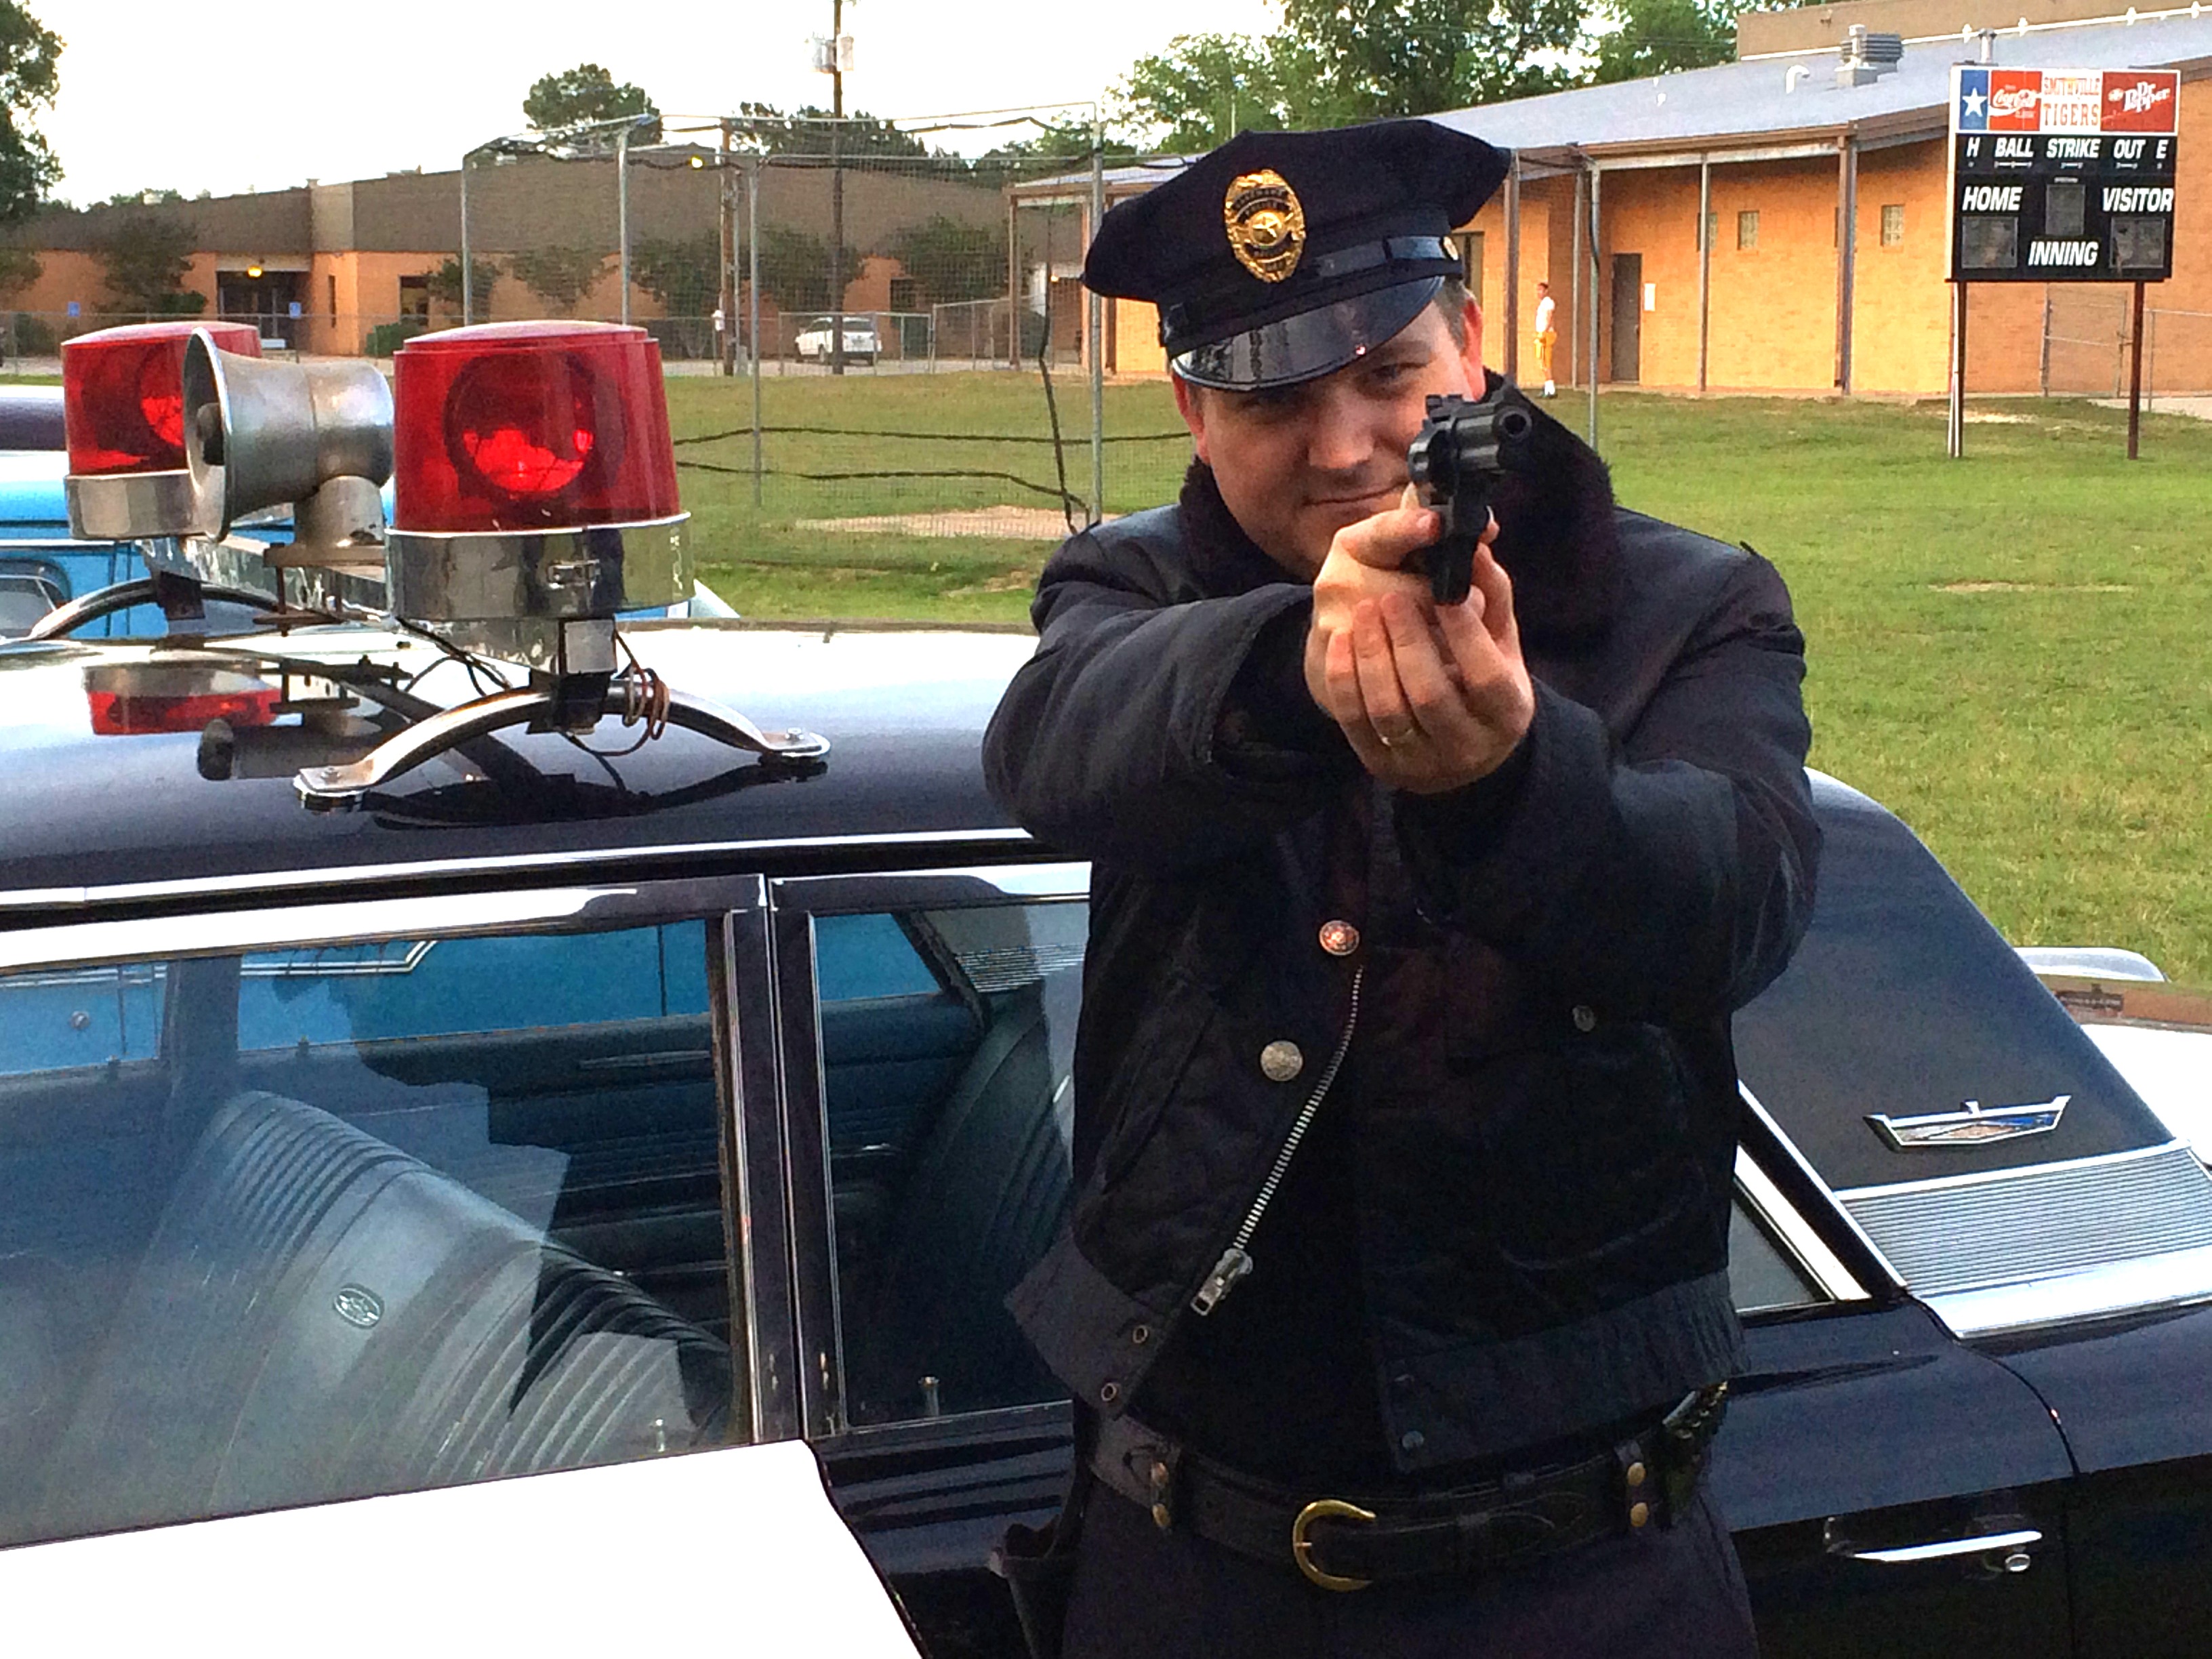 Ready for action. On set as a 60's cop